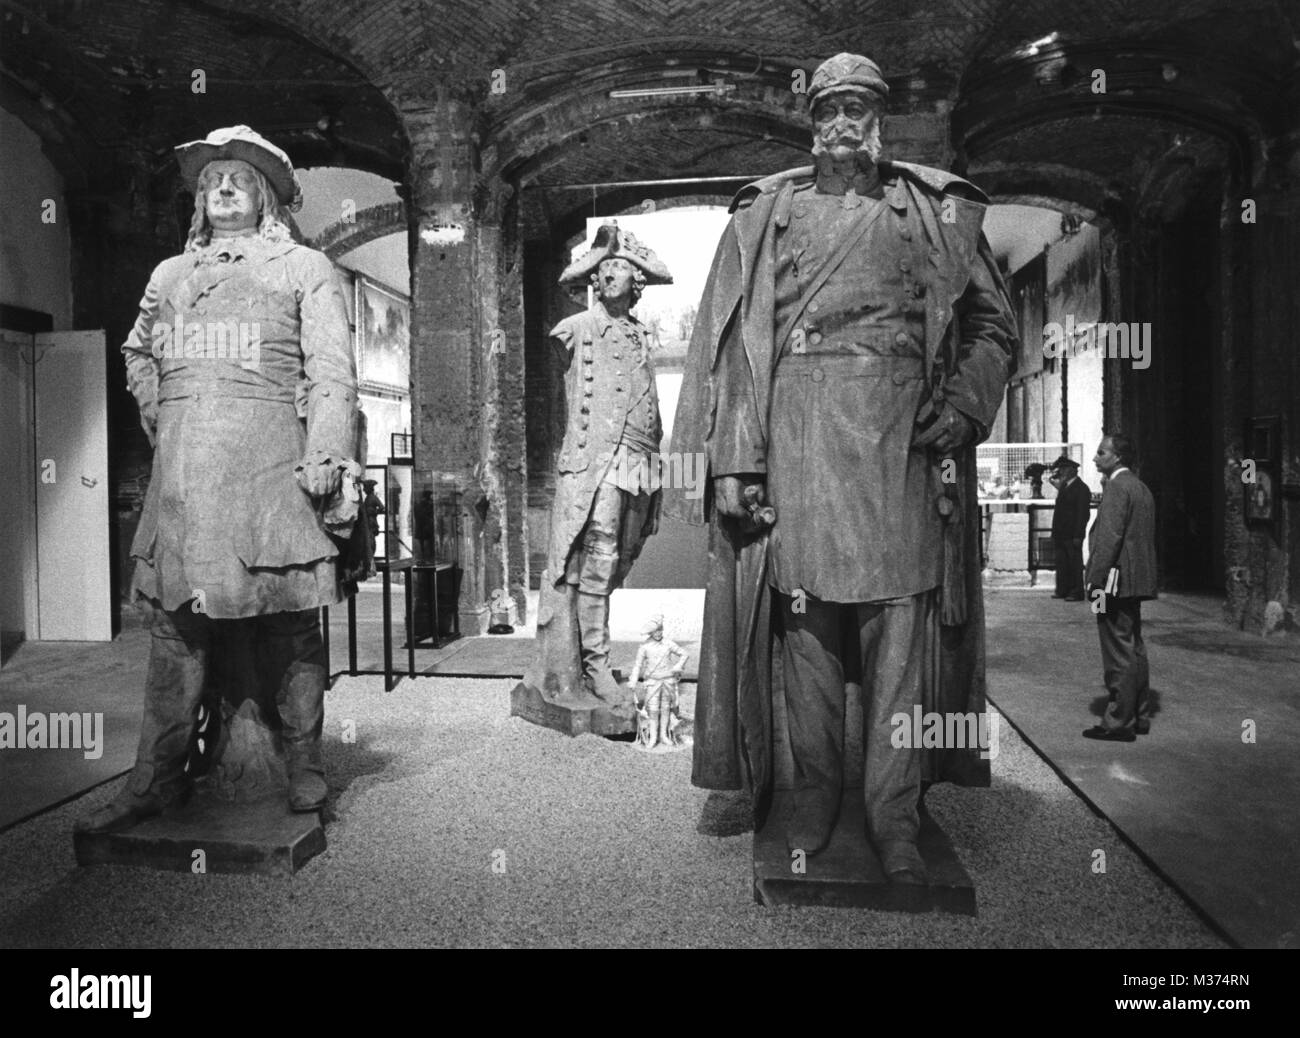 08-15-1981. Prussia exhibition in Berlin 1981. Statues of Frederick II byname the Great Elector, and Emperor Wilhelm I. Both statues are part of the exhibition at  Martin-Gropius-Bau in Berlin. | usage worldwide Stock Photo